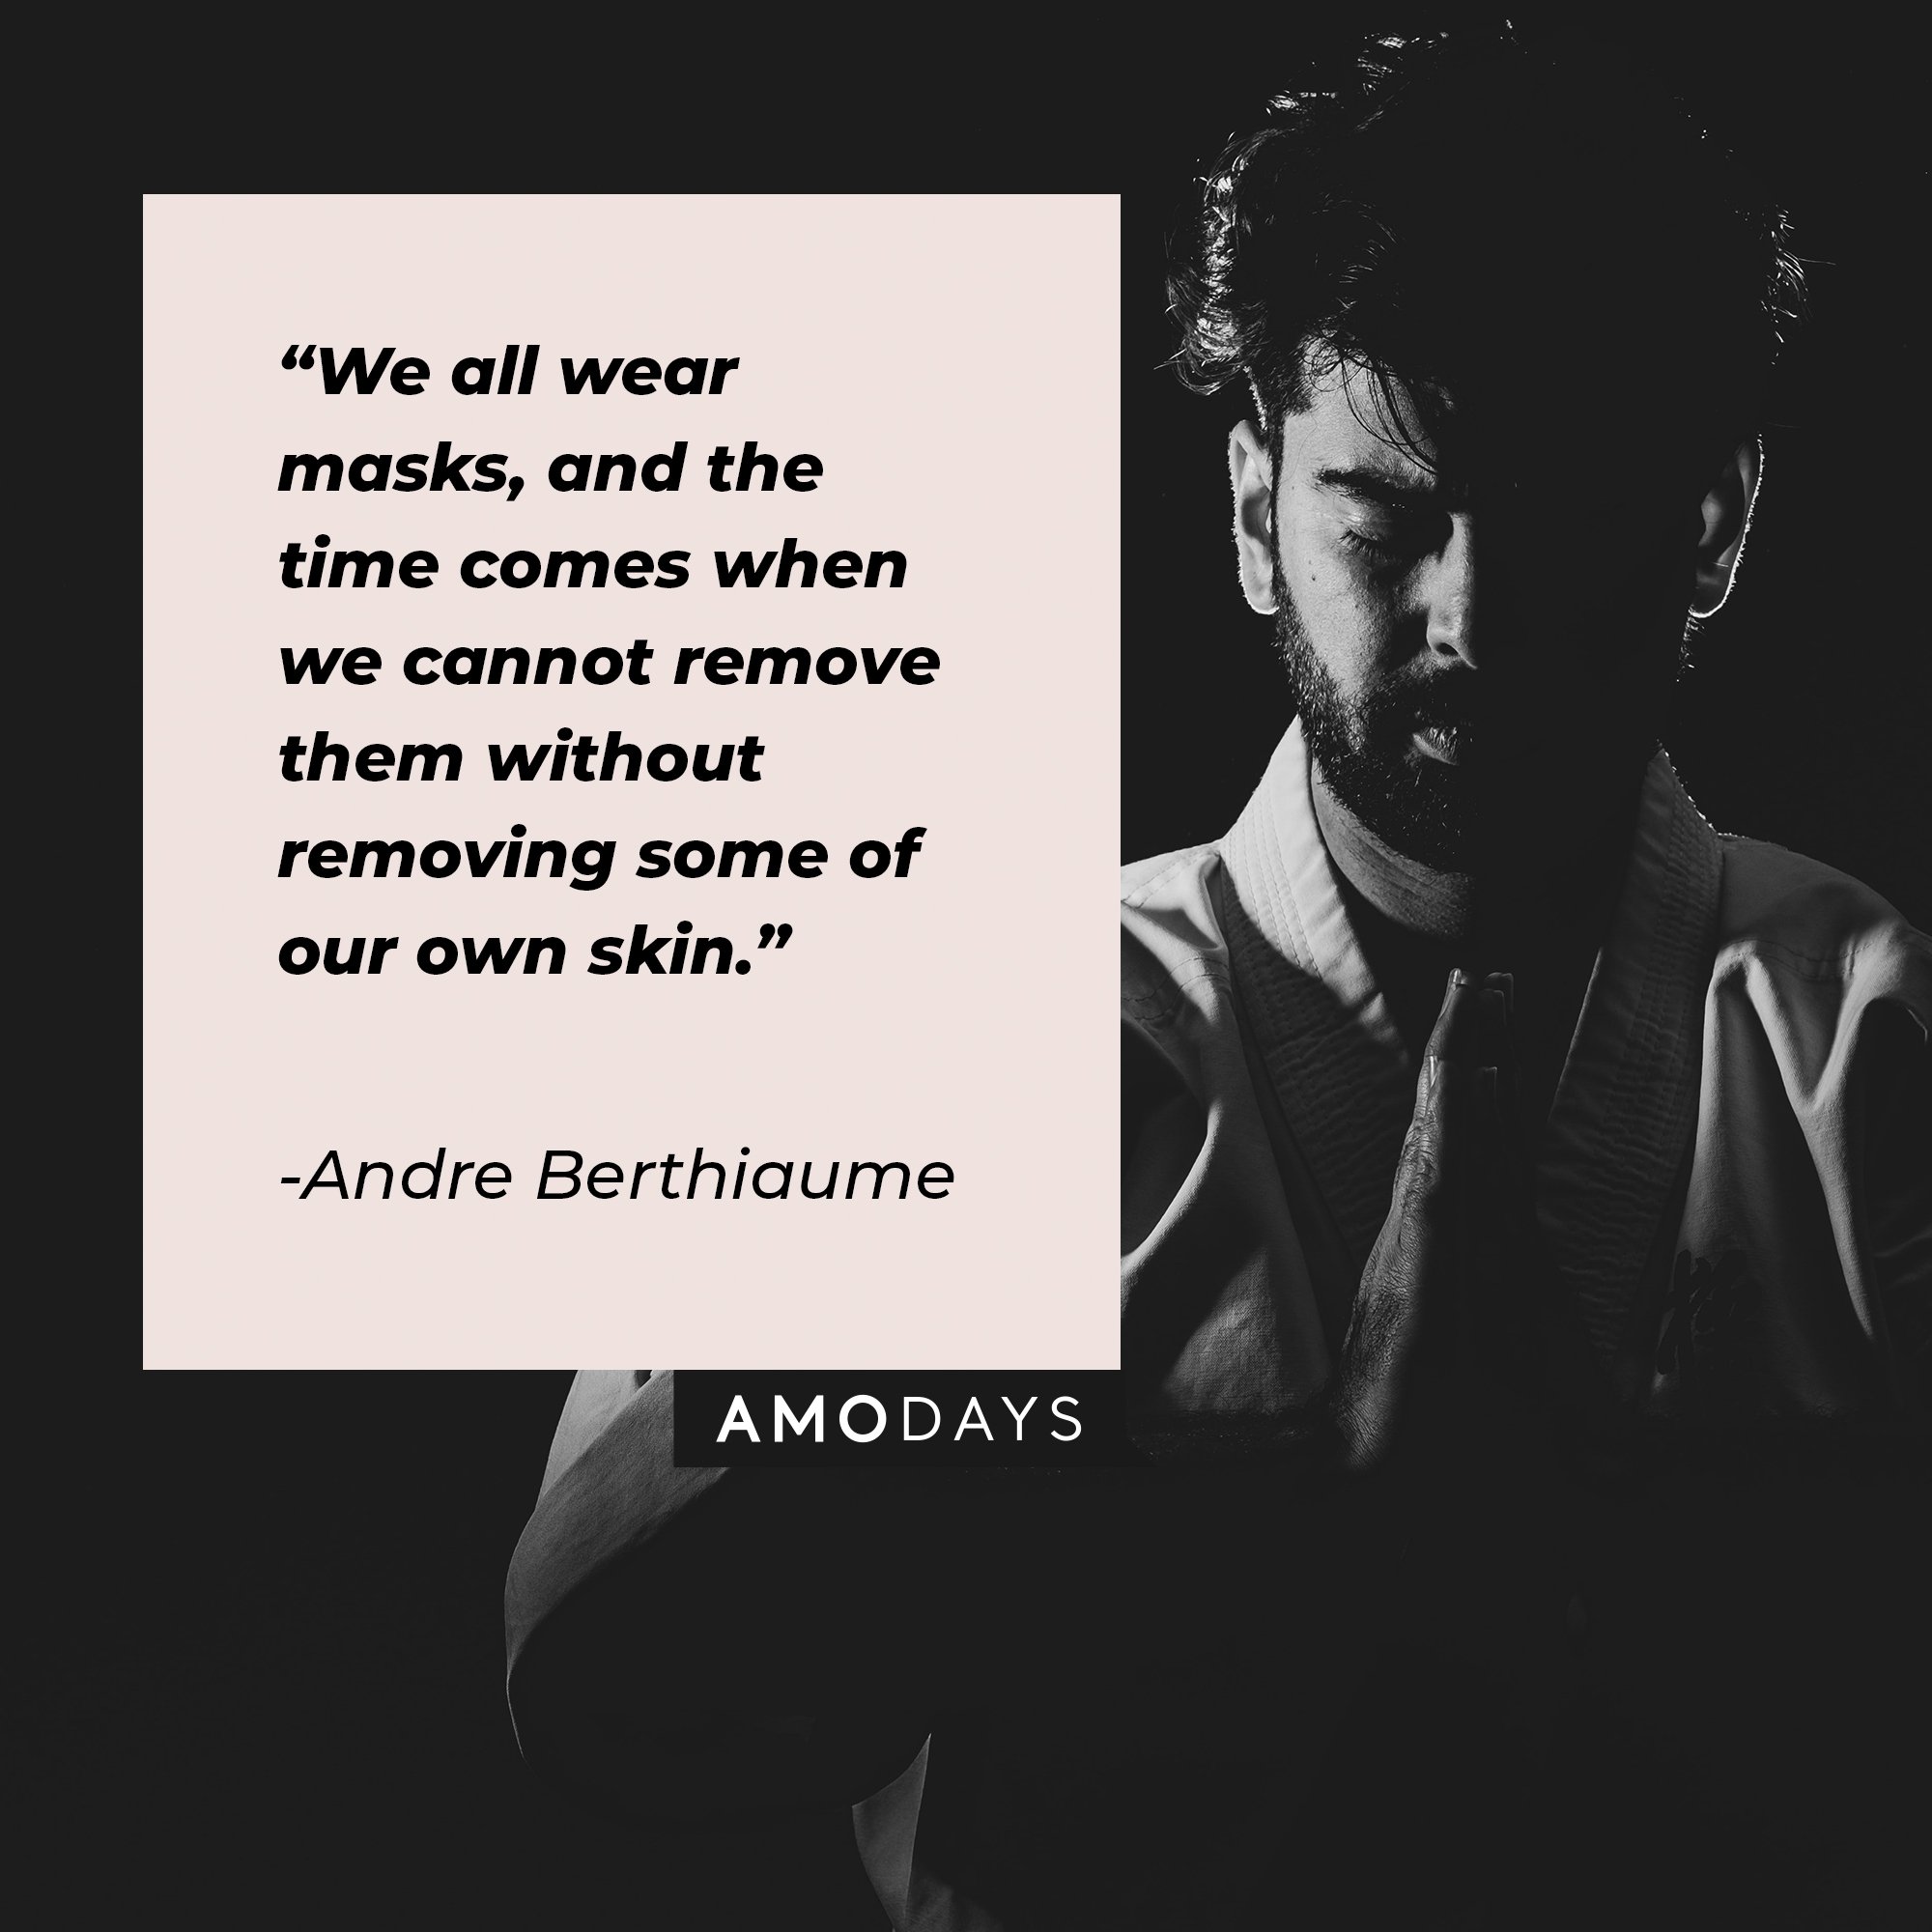 Andre Berthiaume’s quote: "We all wear masks, and the time comes when we cannot remove them without removing some of our own skin." | Image: AmoDays